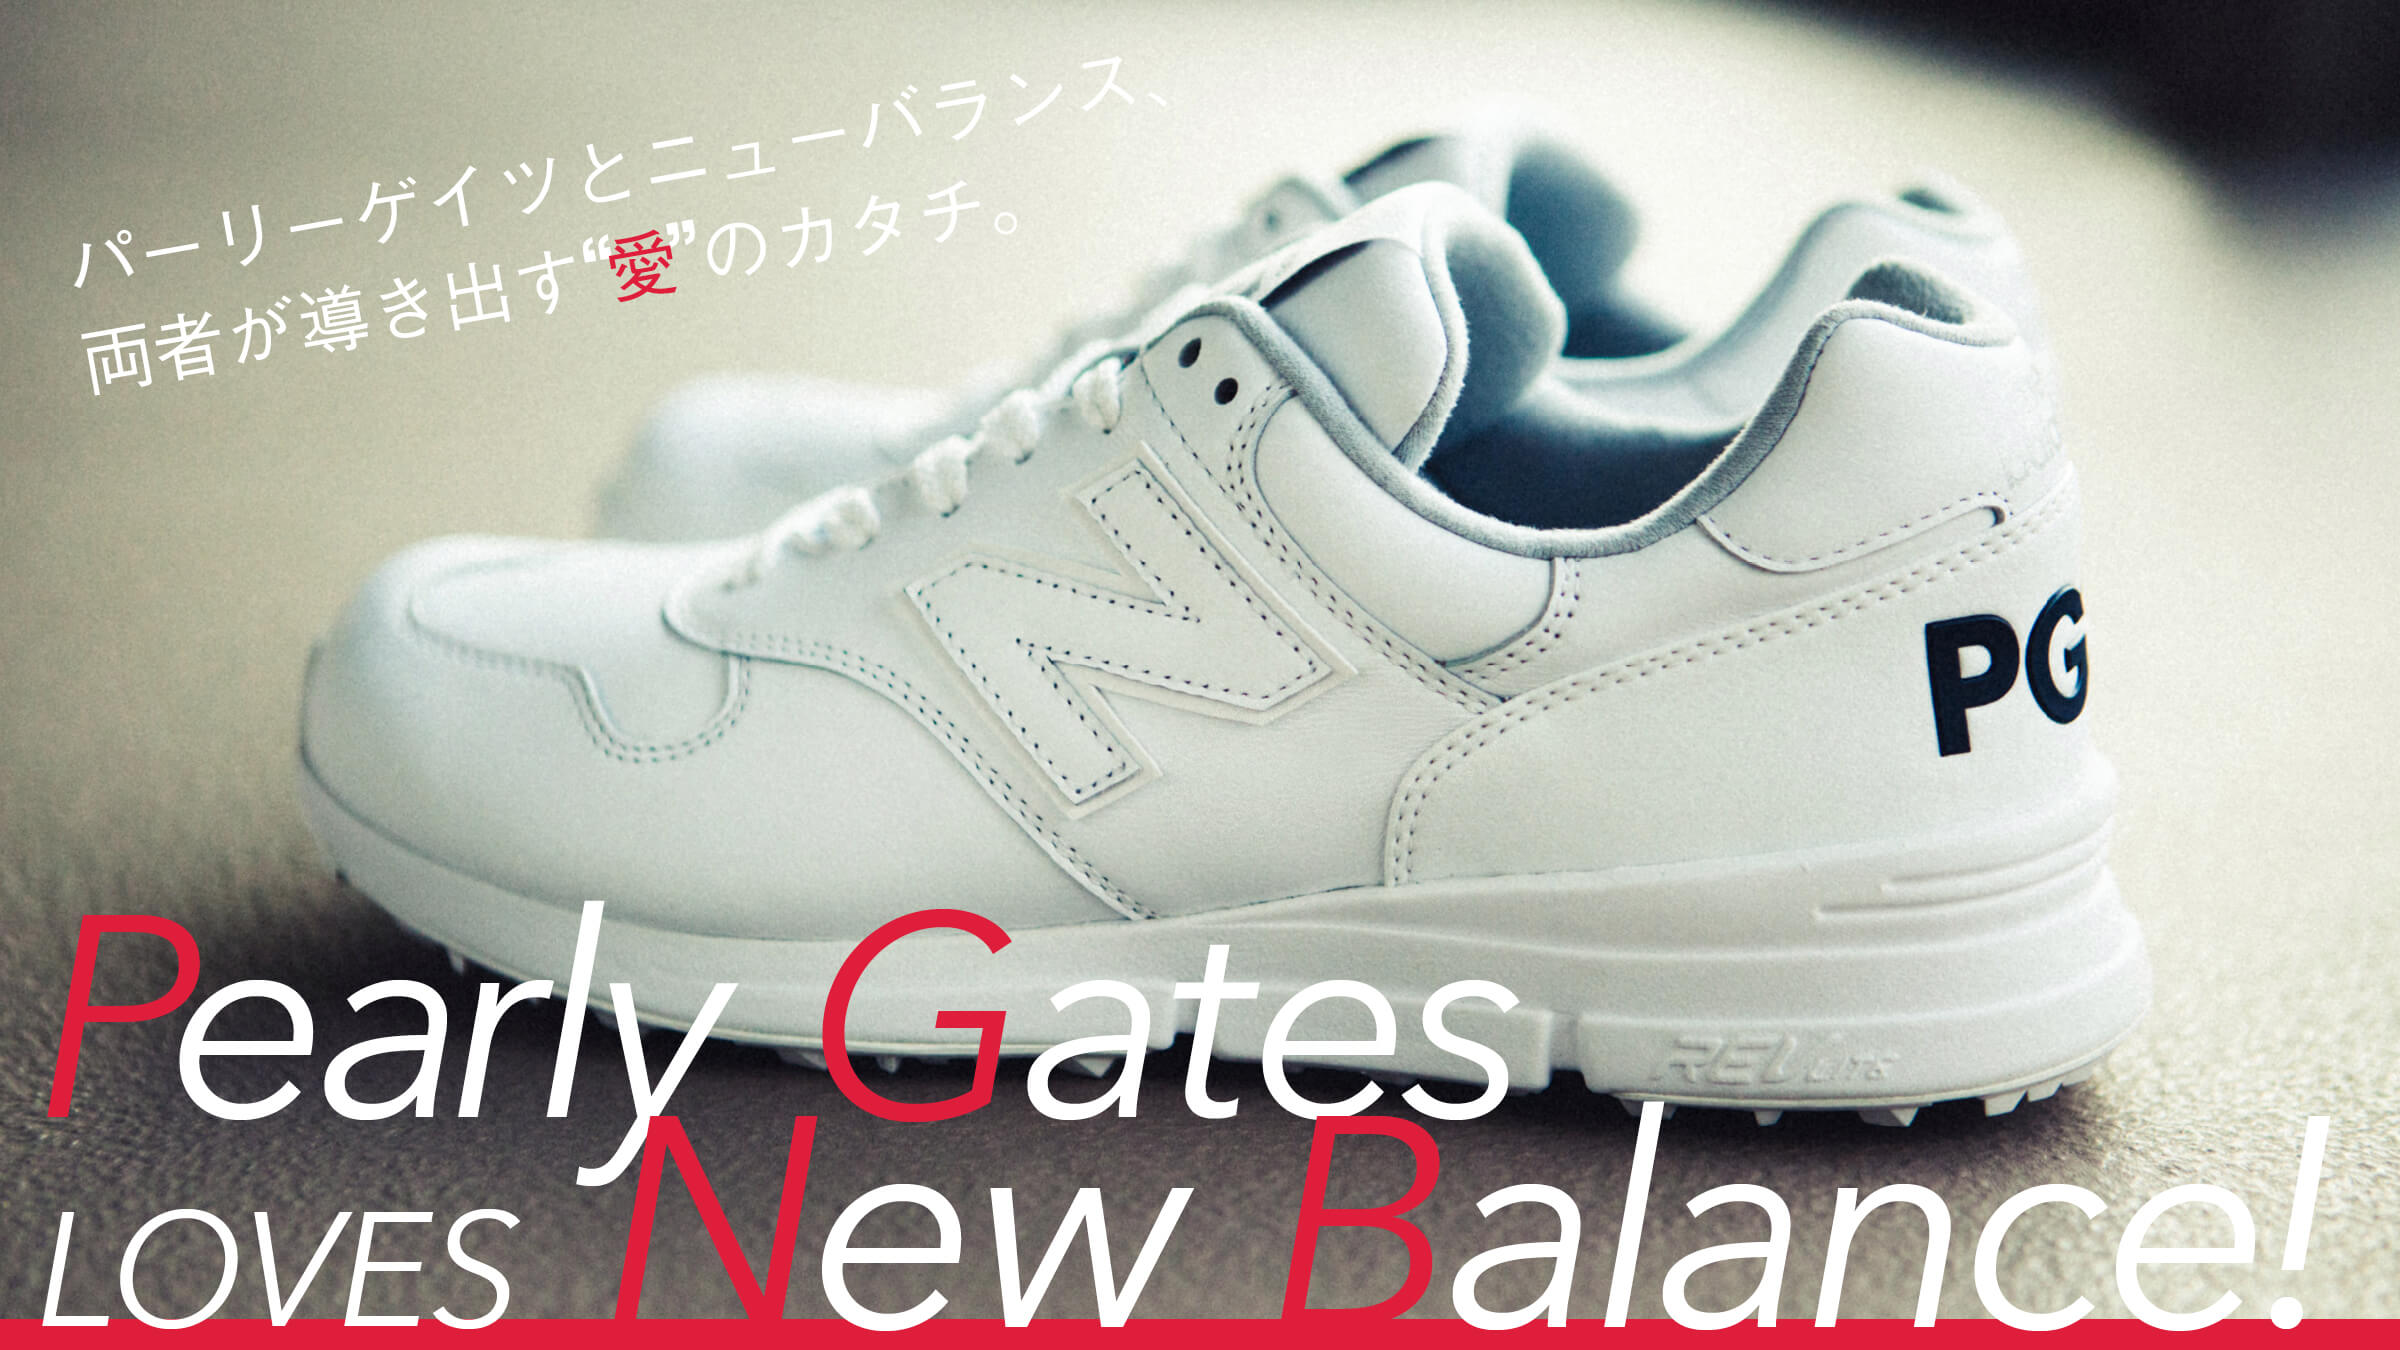 Pearly Gates and New Balance, the form of "love" derived from both.